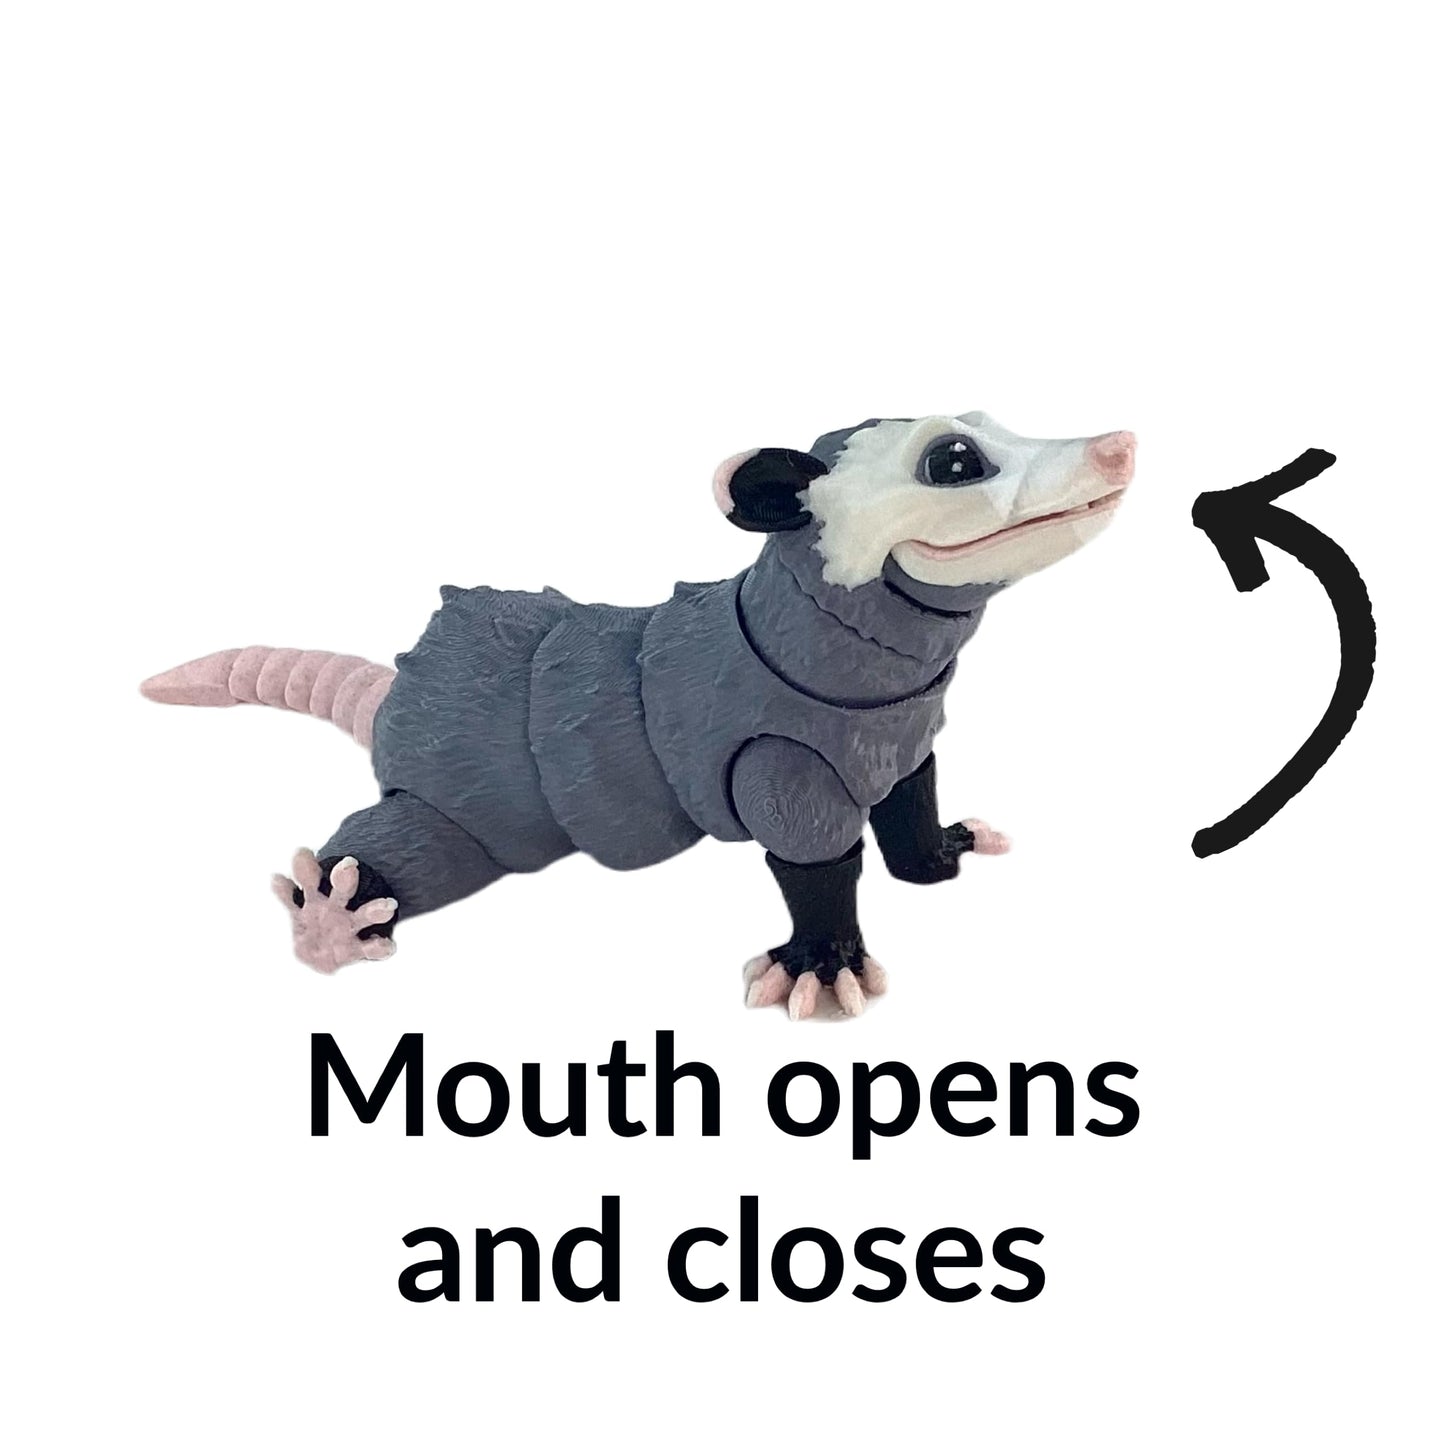 Fidget Opossum 3D Printed Articulated Toy Stress Relief Desk Toy for Kids Adults